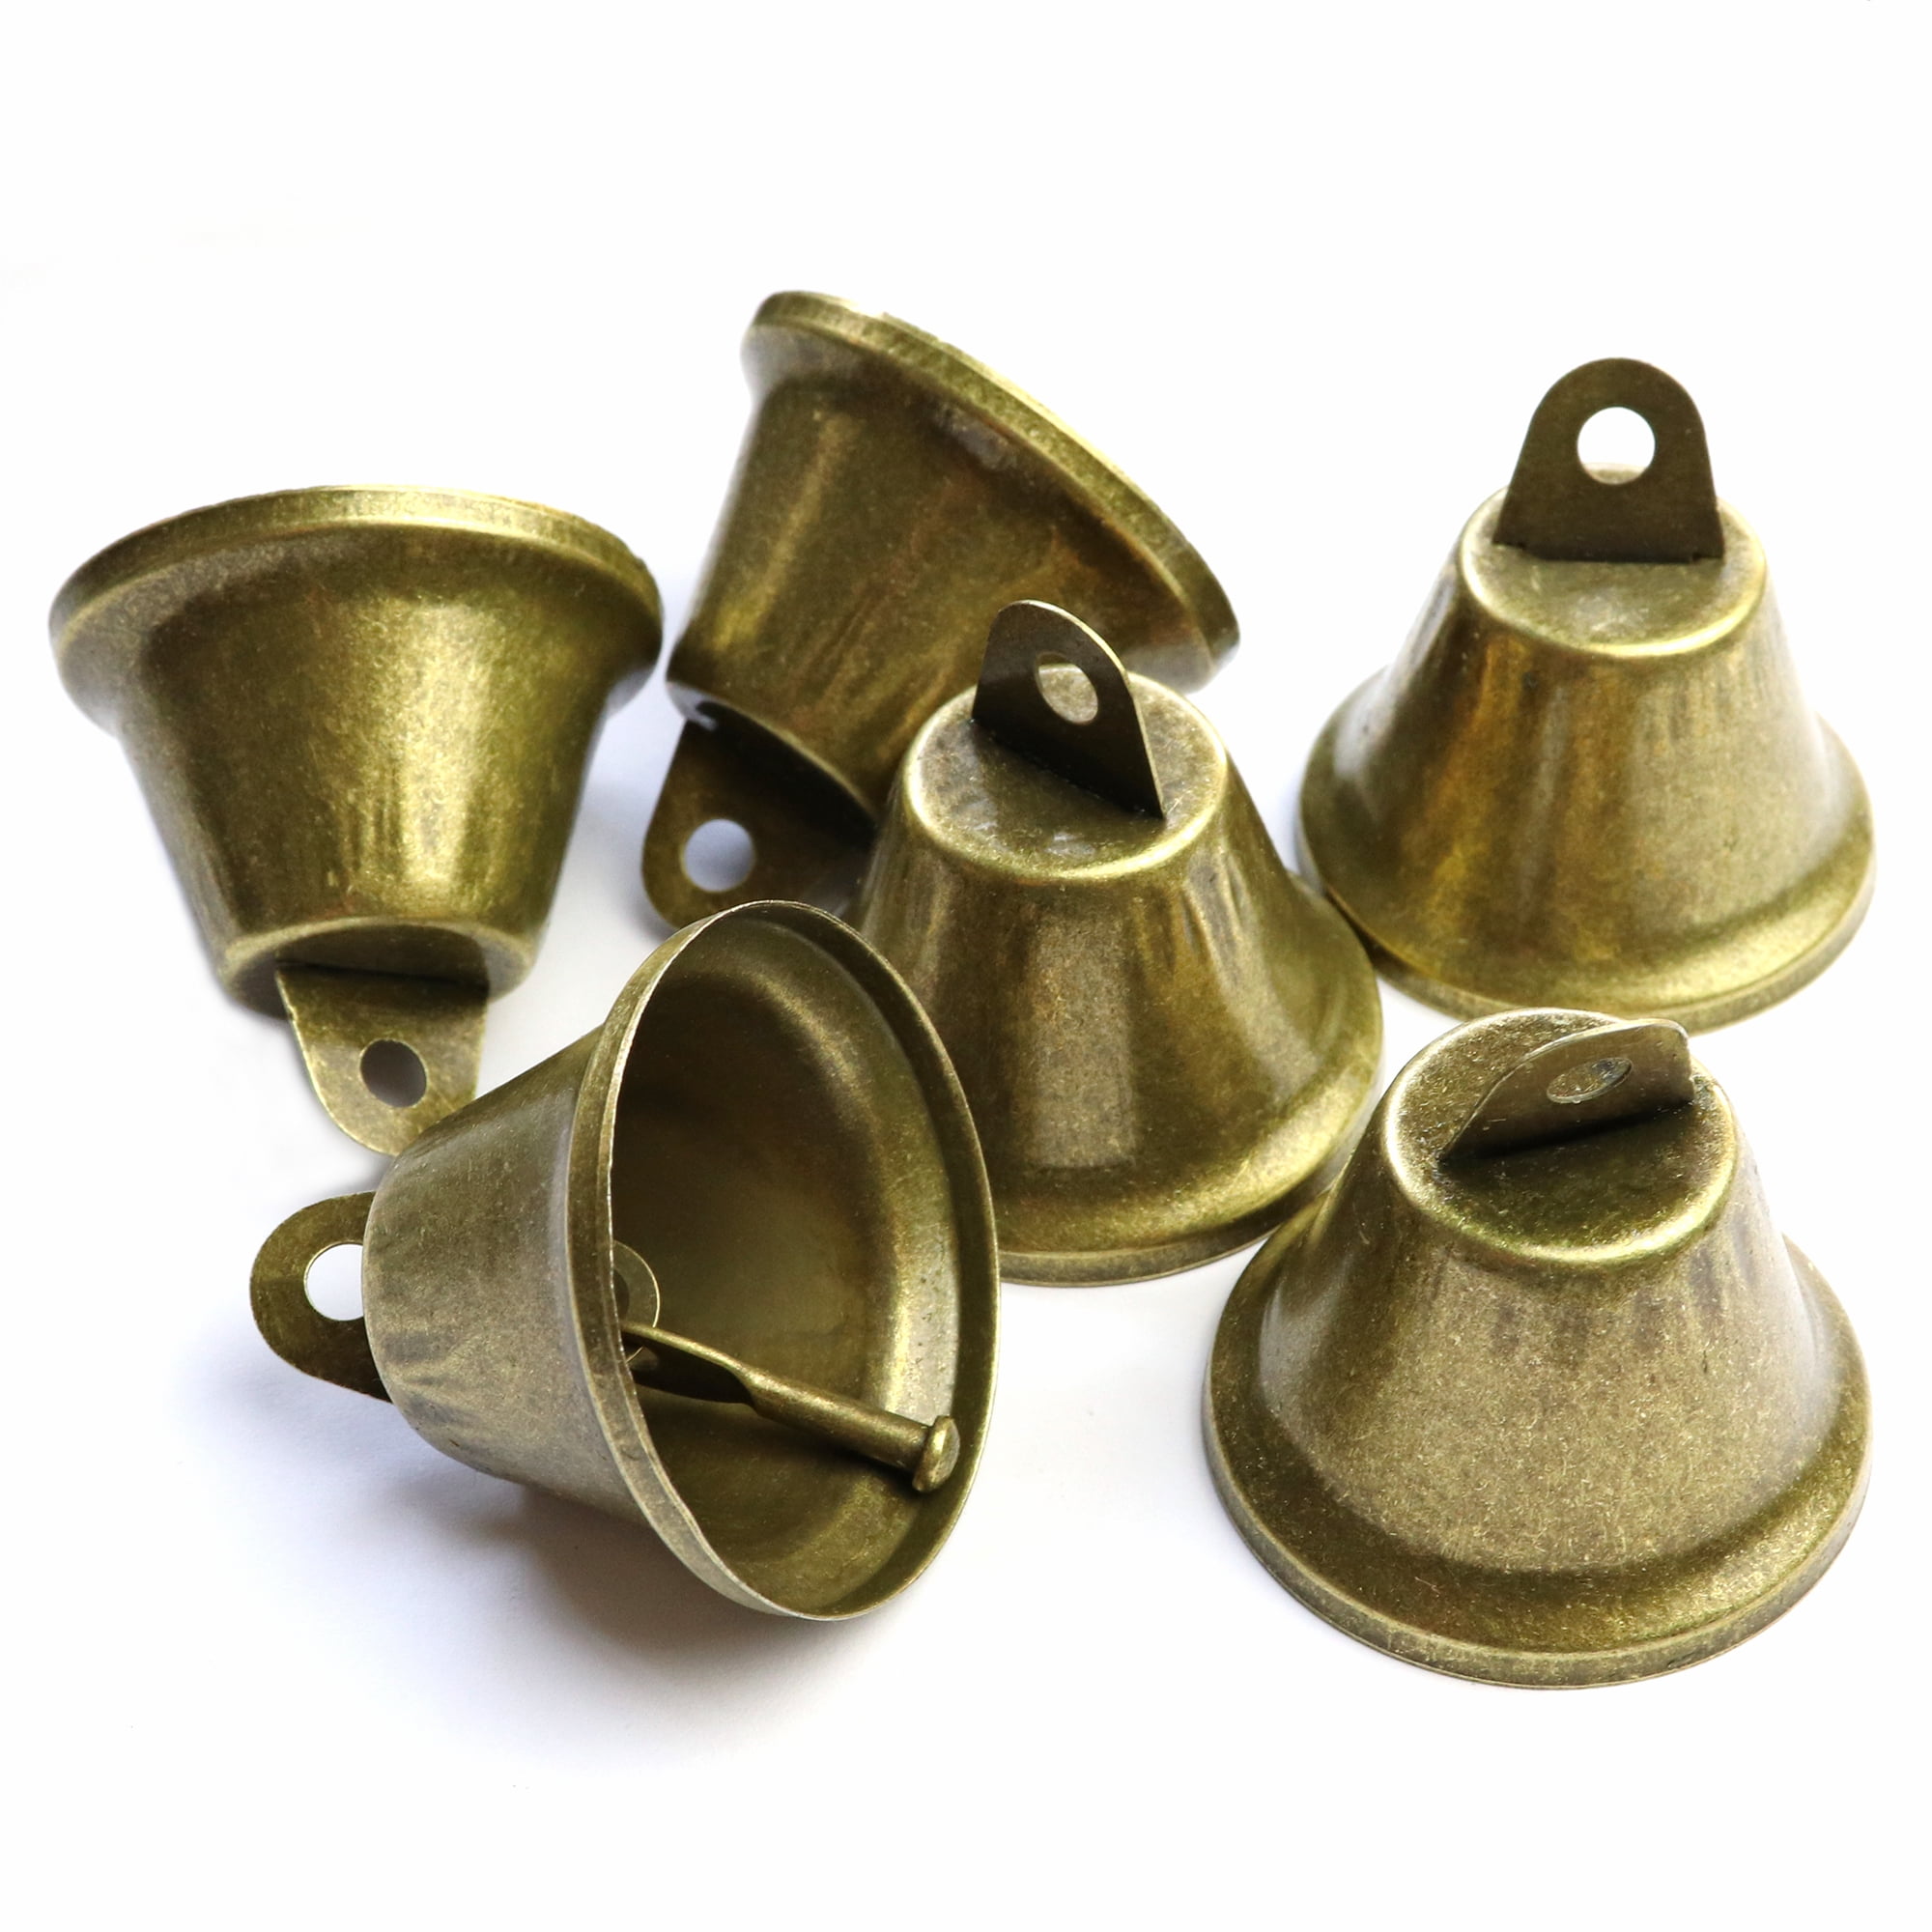 Vintage Bronze Jingle Bells Craft Bells 38mm / 1.5 Inch for Dog Potty  Training, Housebreaking, Wind Chimes, Christmas Bell (25 Pieces) 